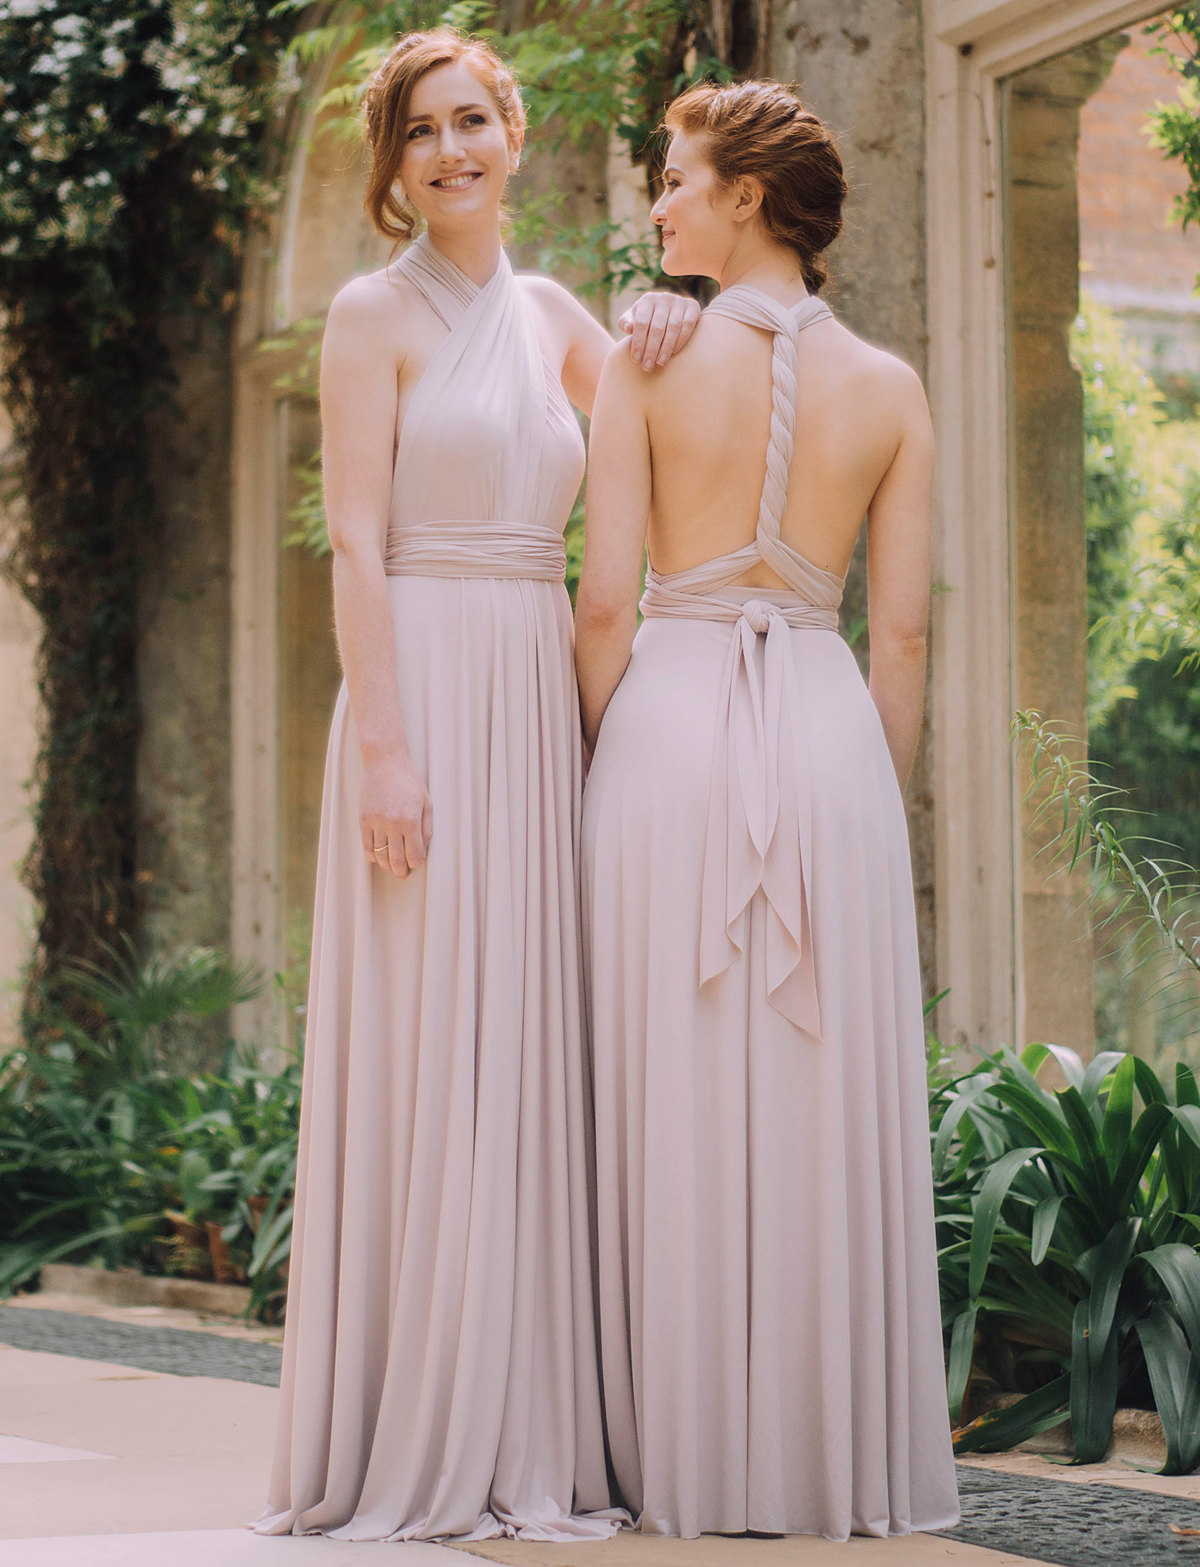 Willow Pearl multiway bridesmaids dresses Willow multiway dresses in Blush halter neck wrap